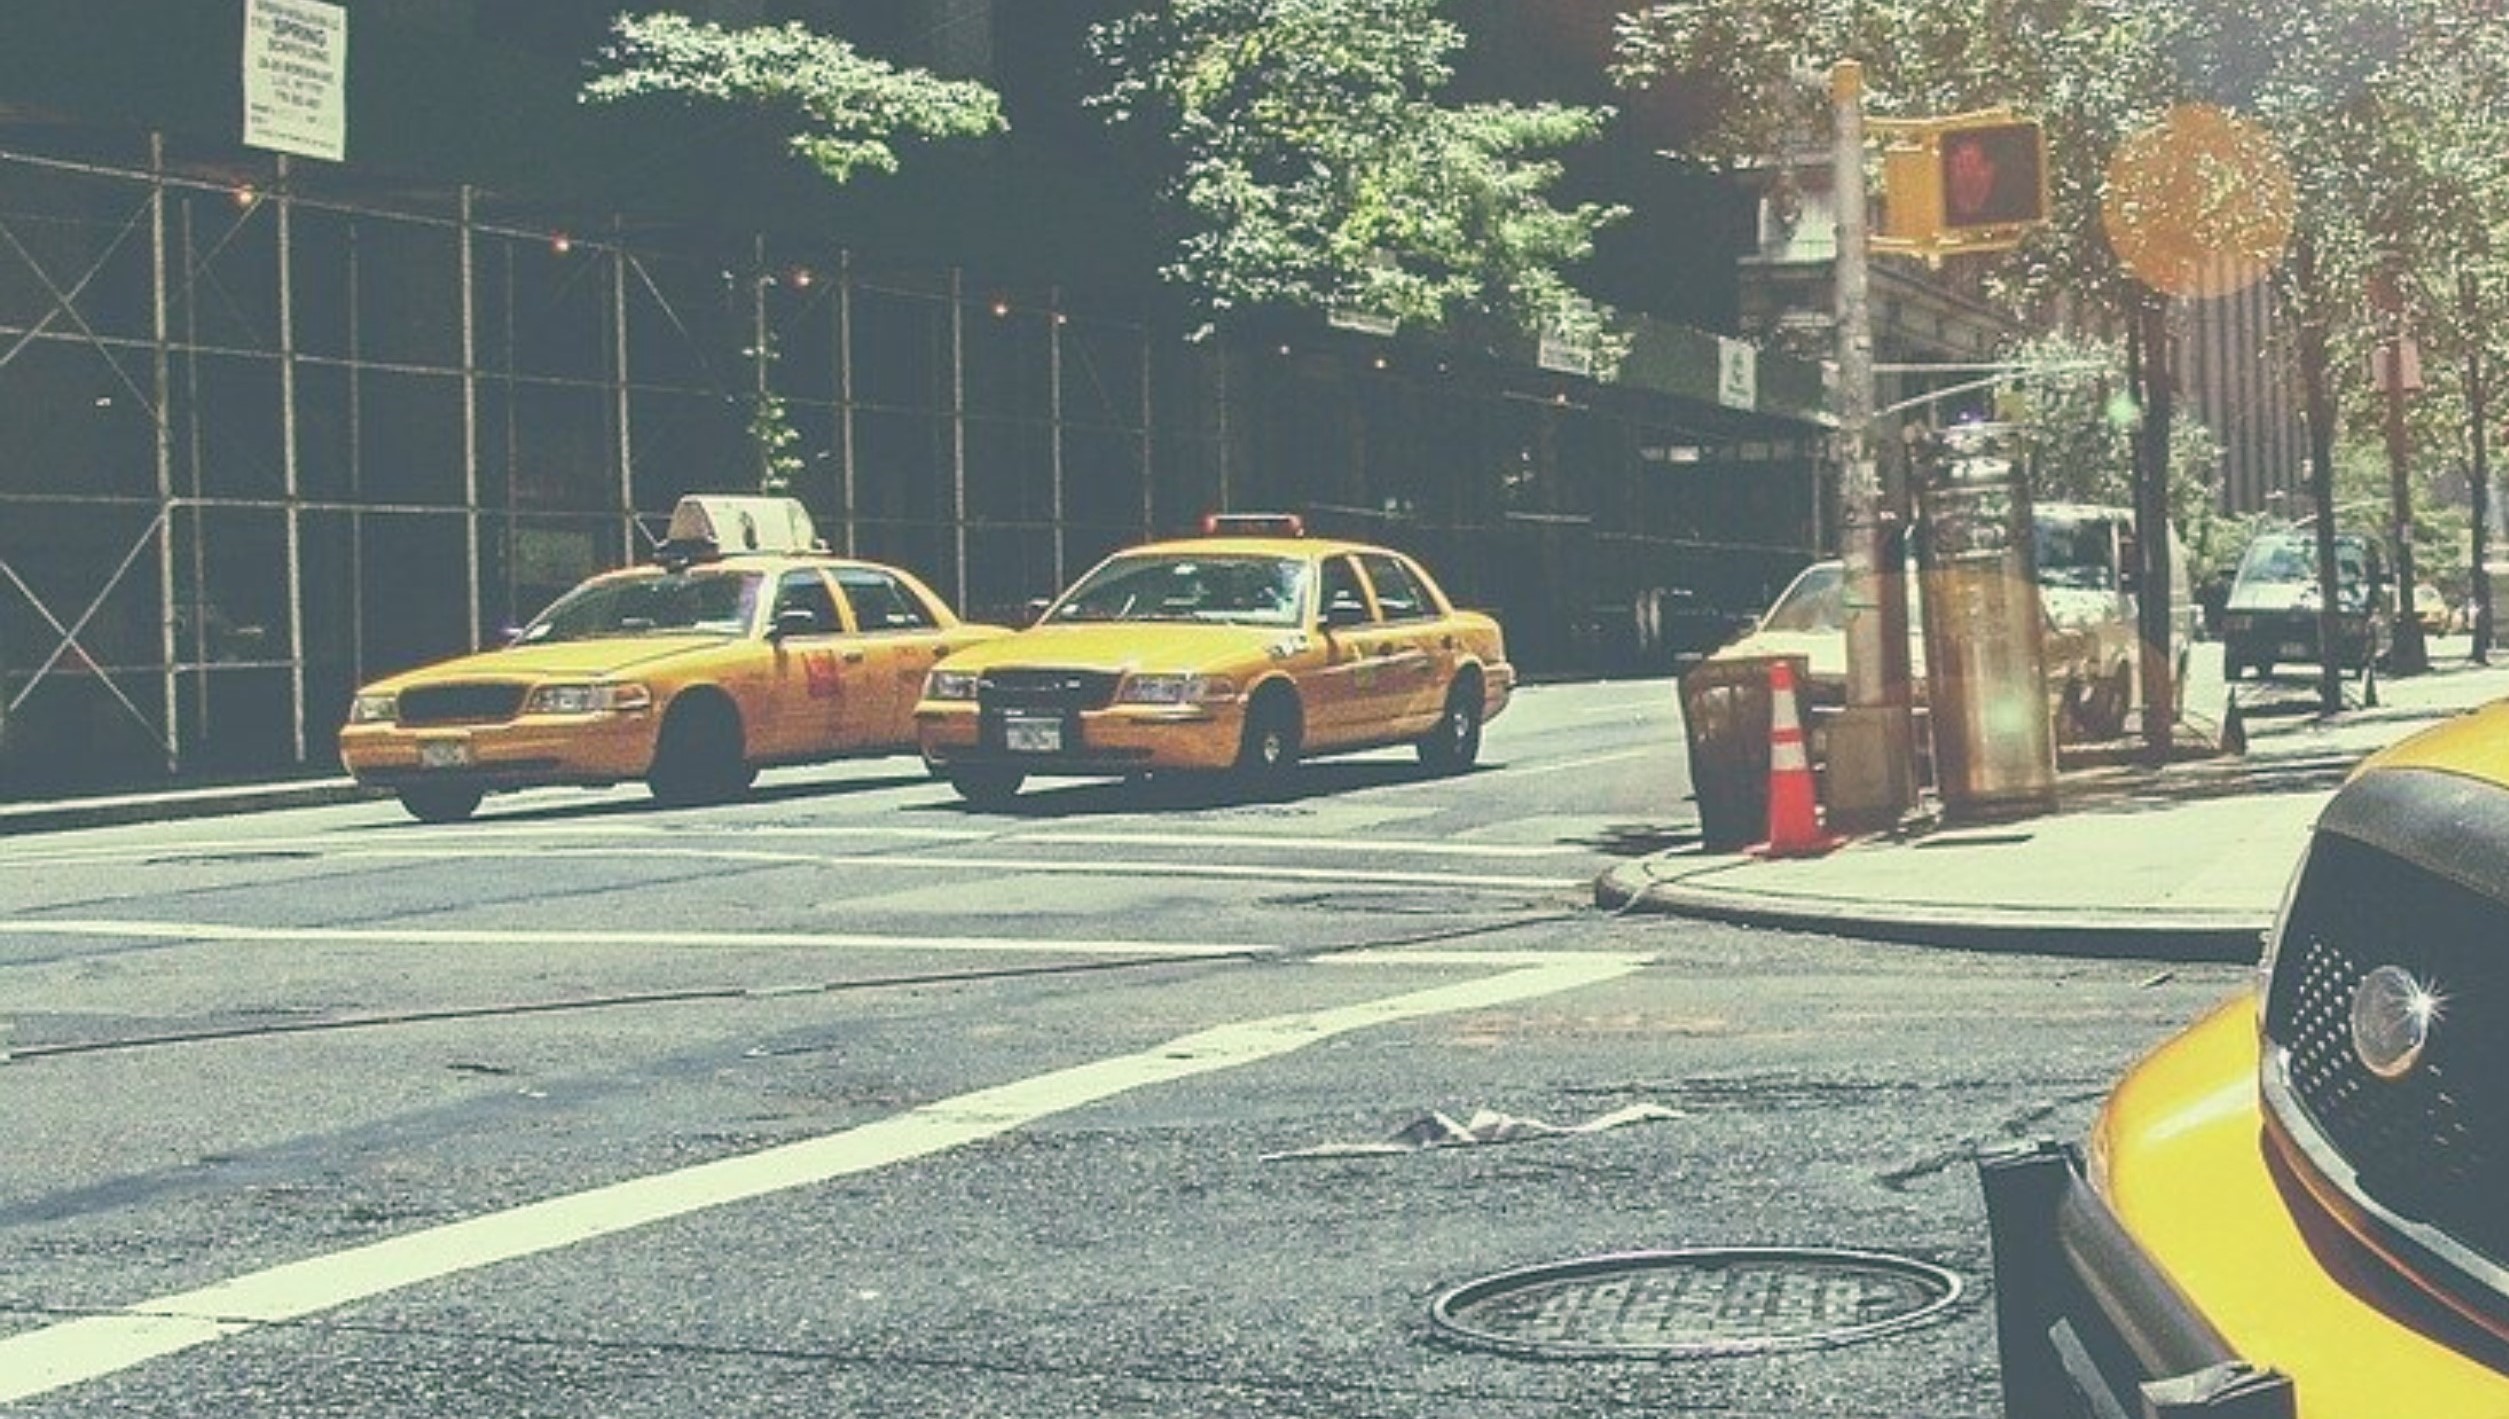 Yellow taxi cab on the street